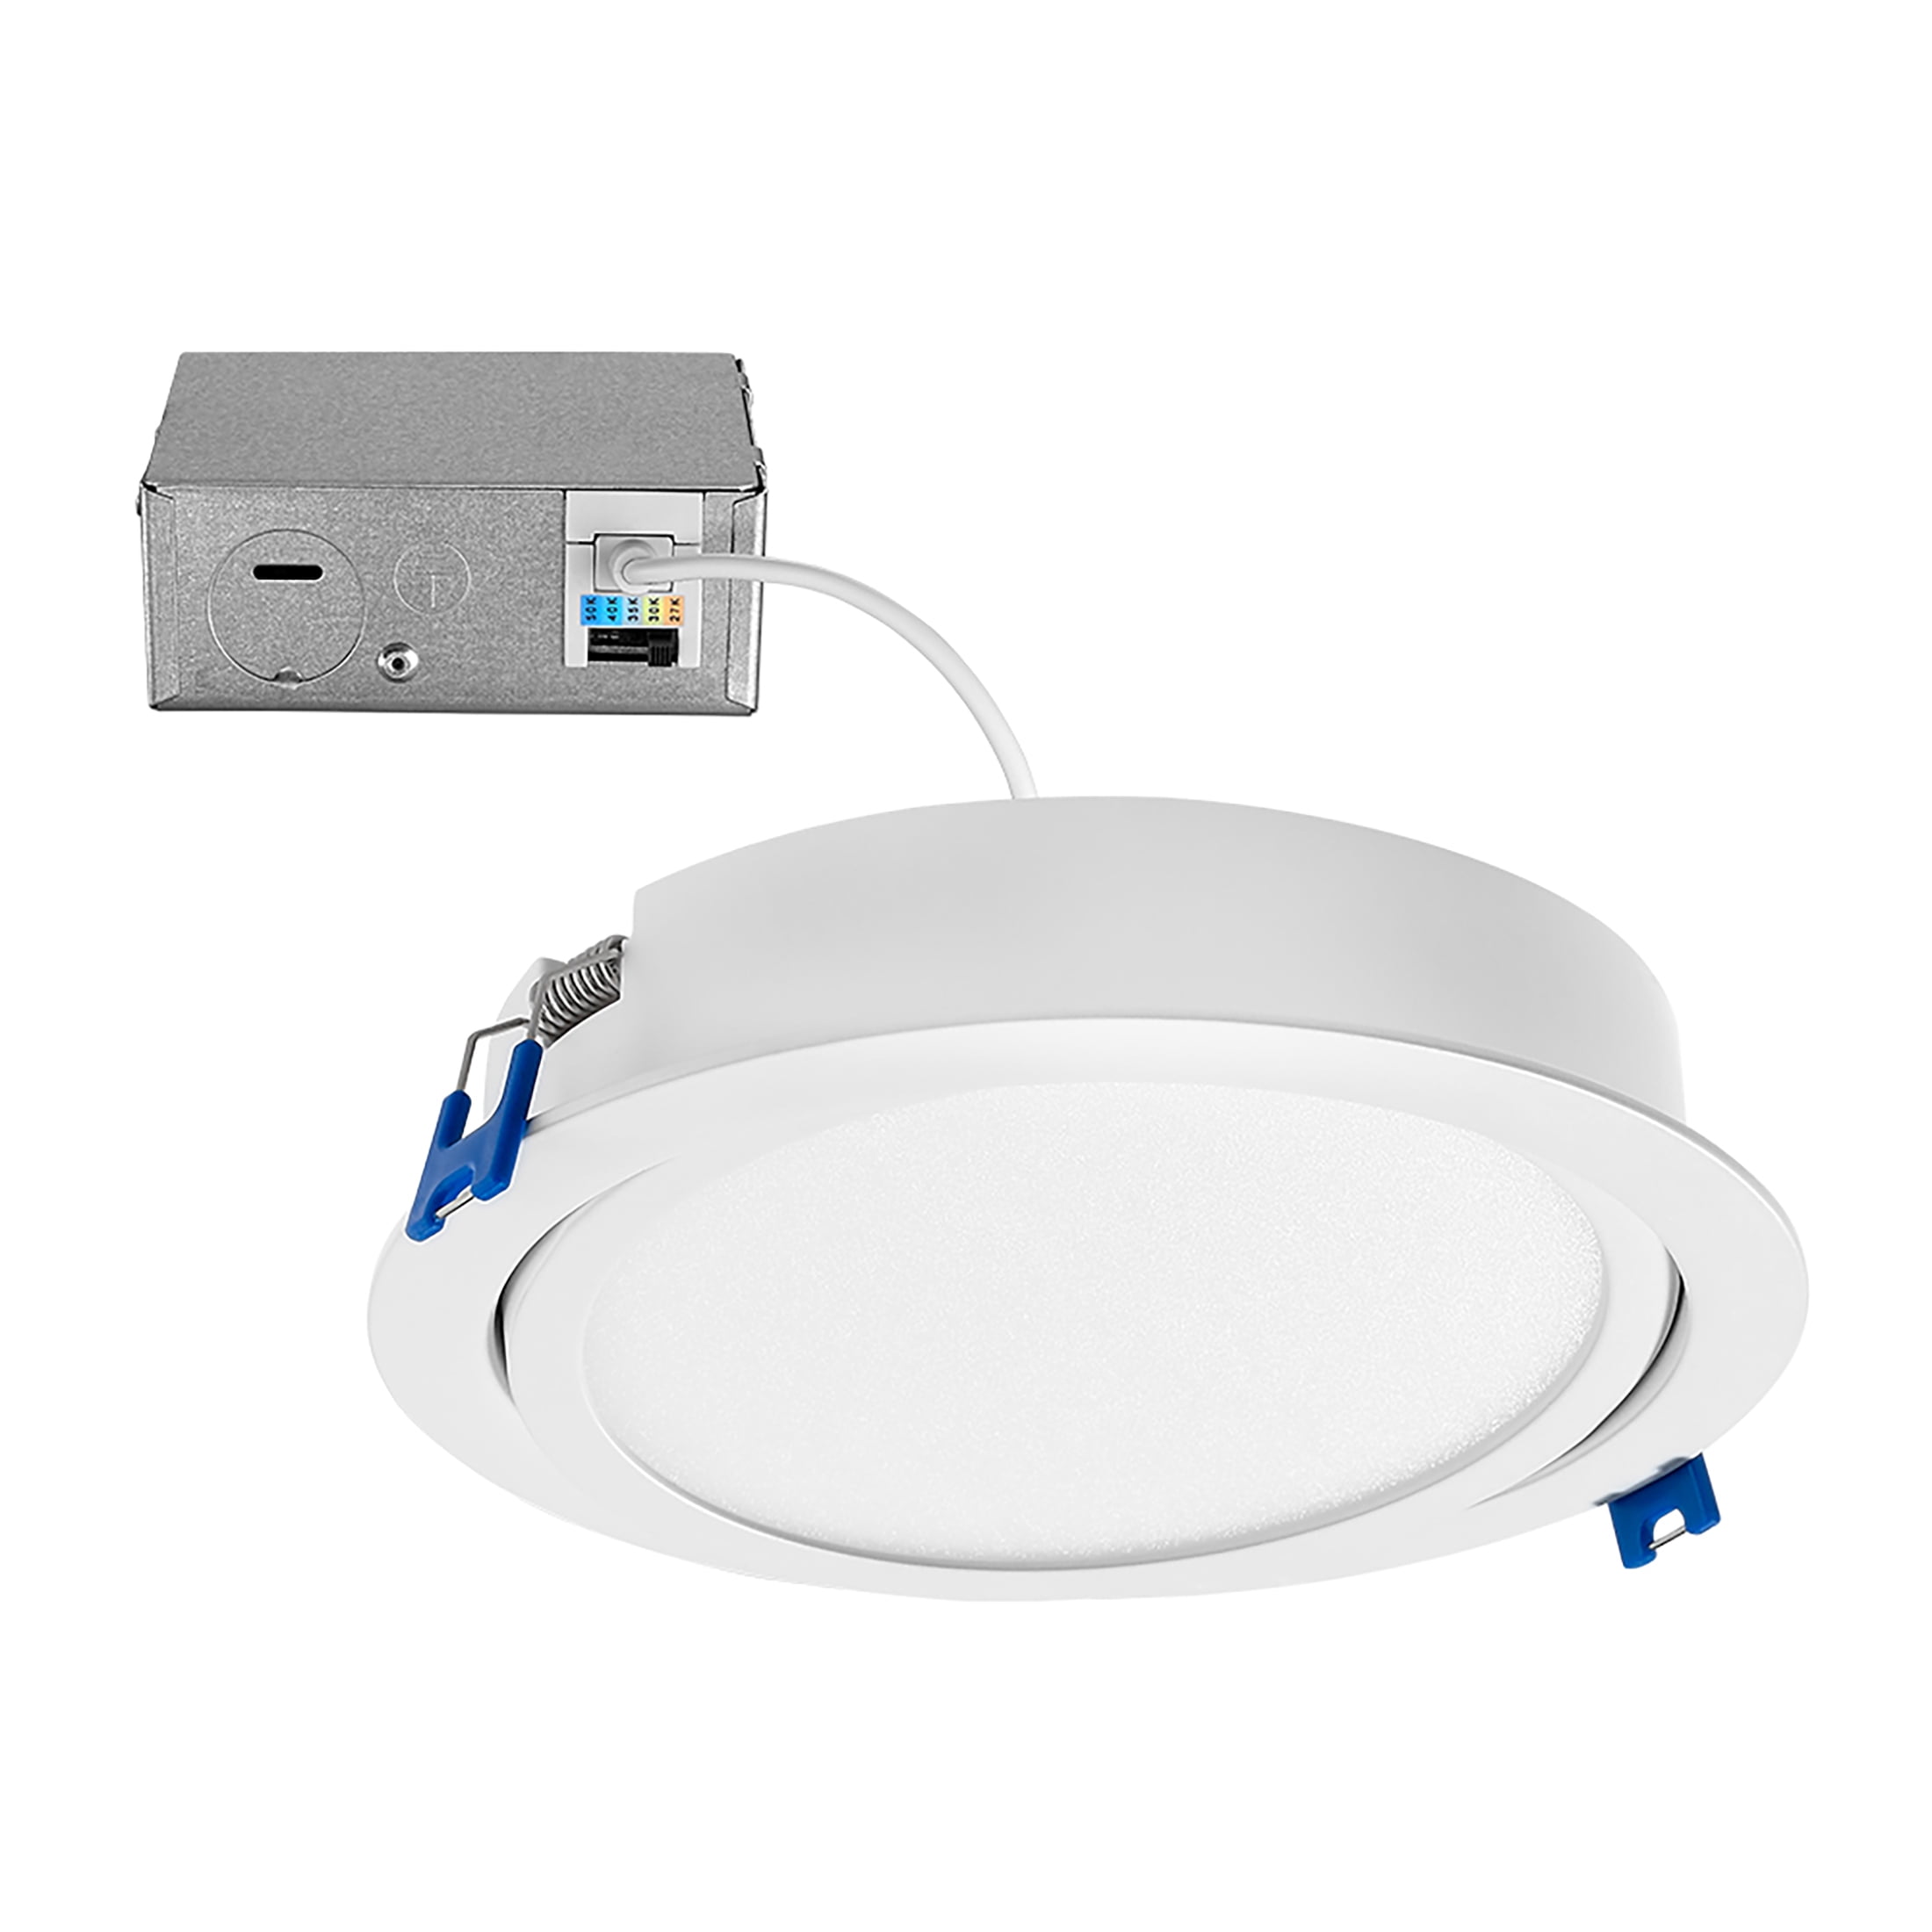 LUXRITE 6 Inch Commercial LED Downlight with J-Box, 15/19/24W, 4 Color  Selectable 3000K-5000K, CRI 90, 1200/1600/2000 Lumens, 0-10V Dimmable